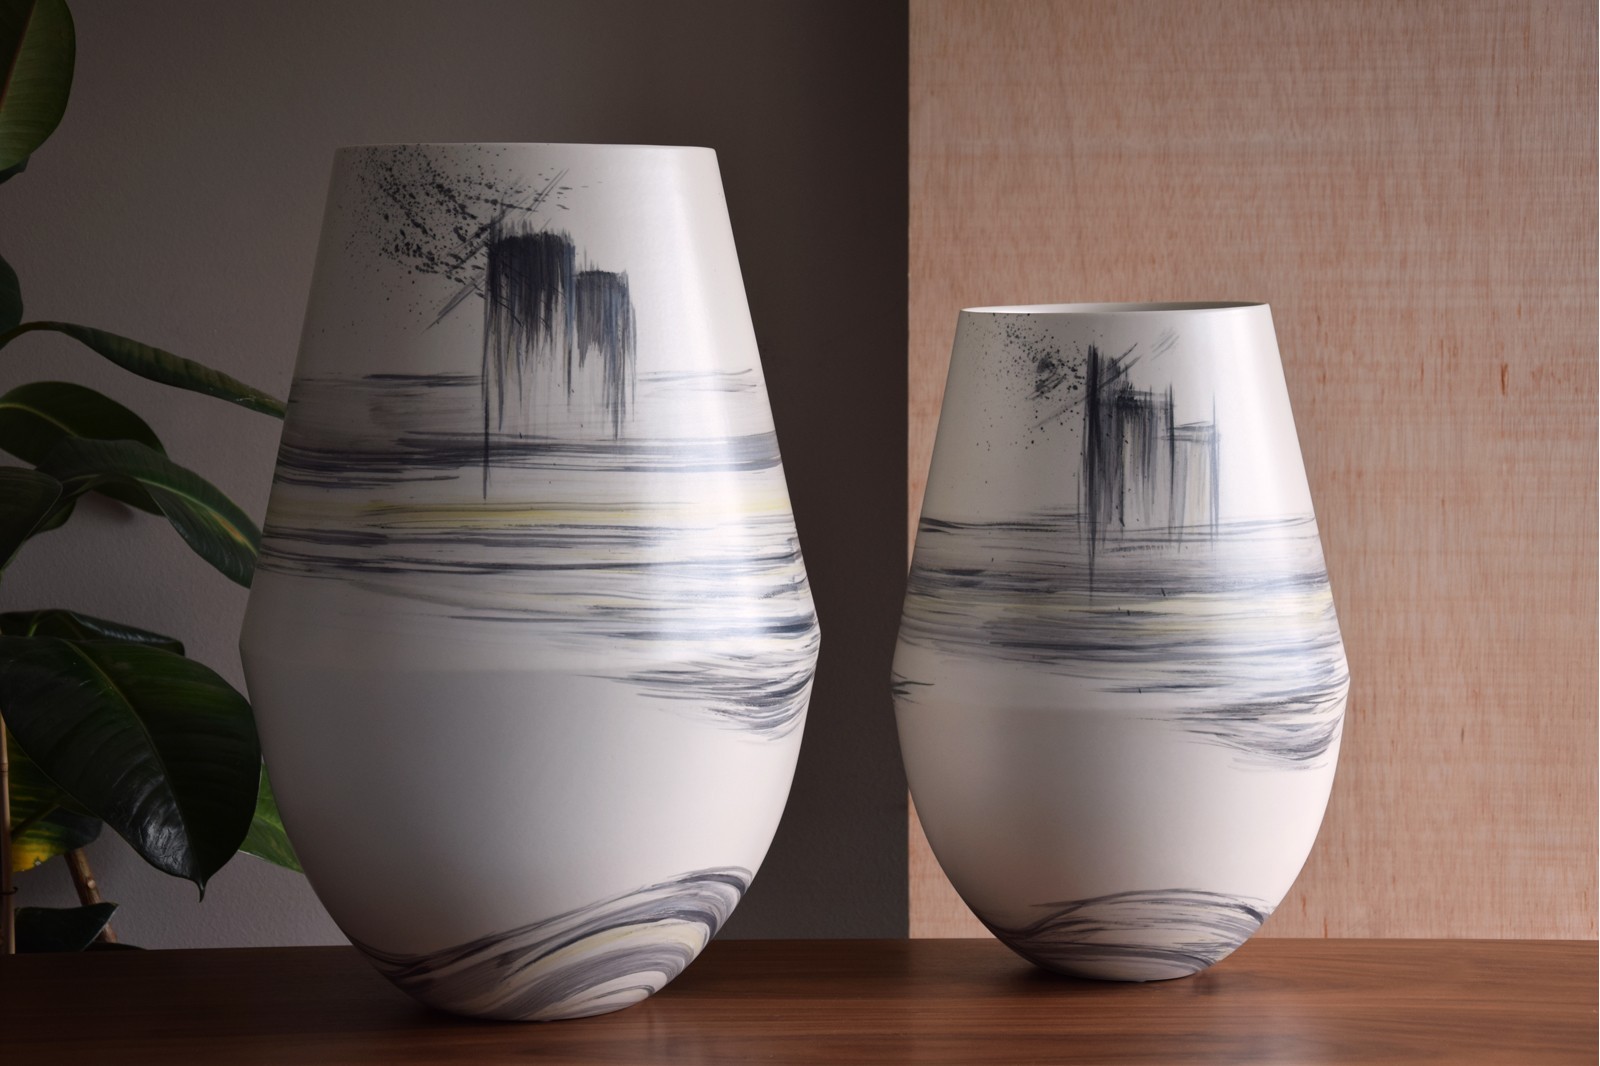 TOKYO COLLECTION: HAND-PAINTED CERAMIC VASES